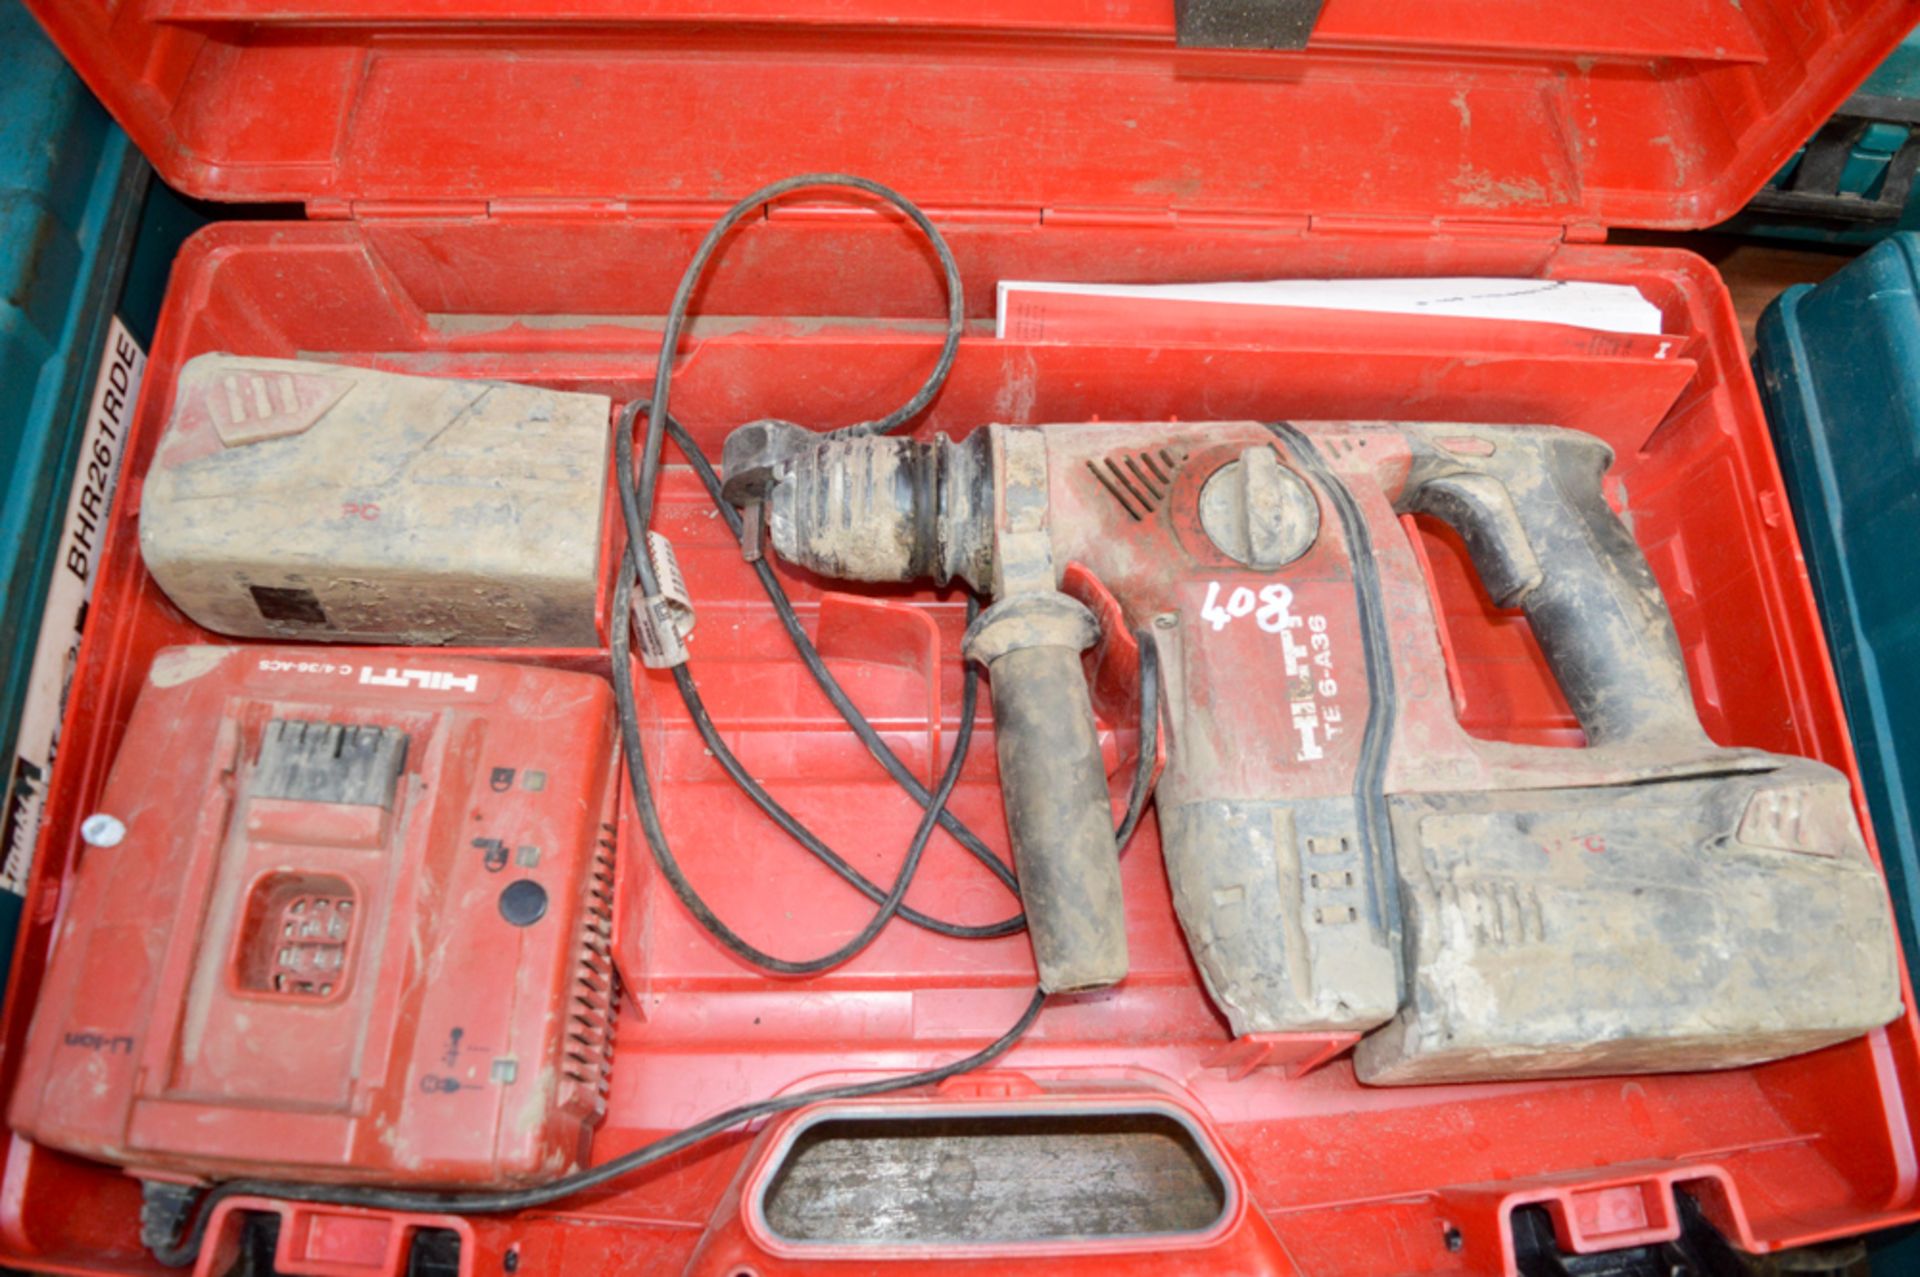 Hilti 36v cordless SDS rotary hammer drill c/w 2 batteries, charger & carry case